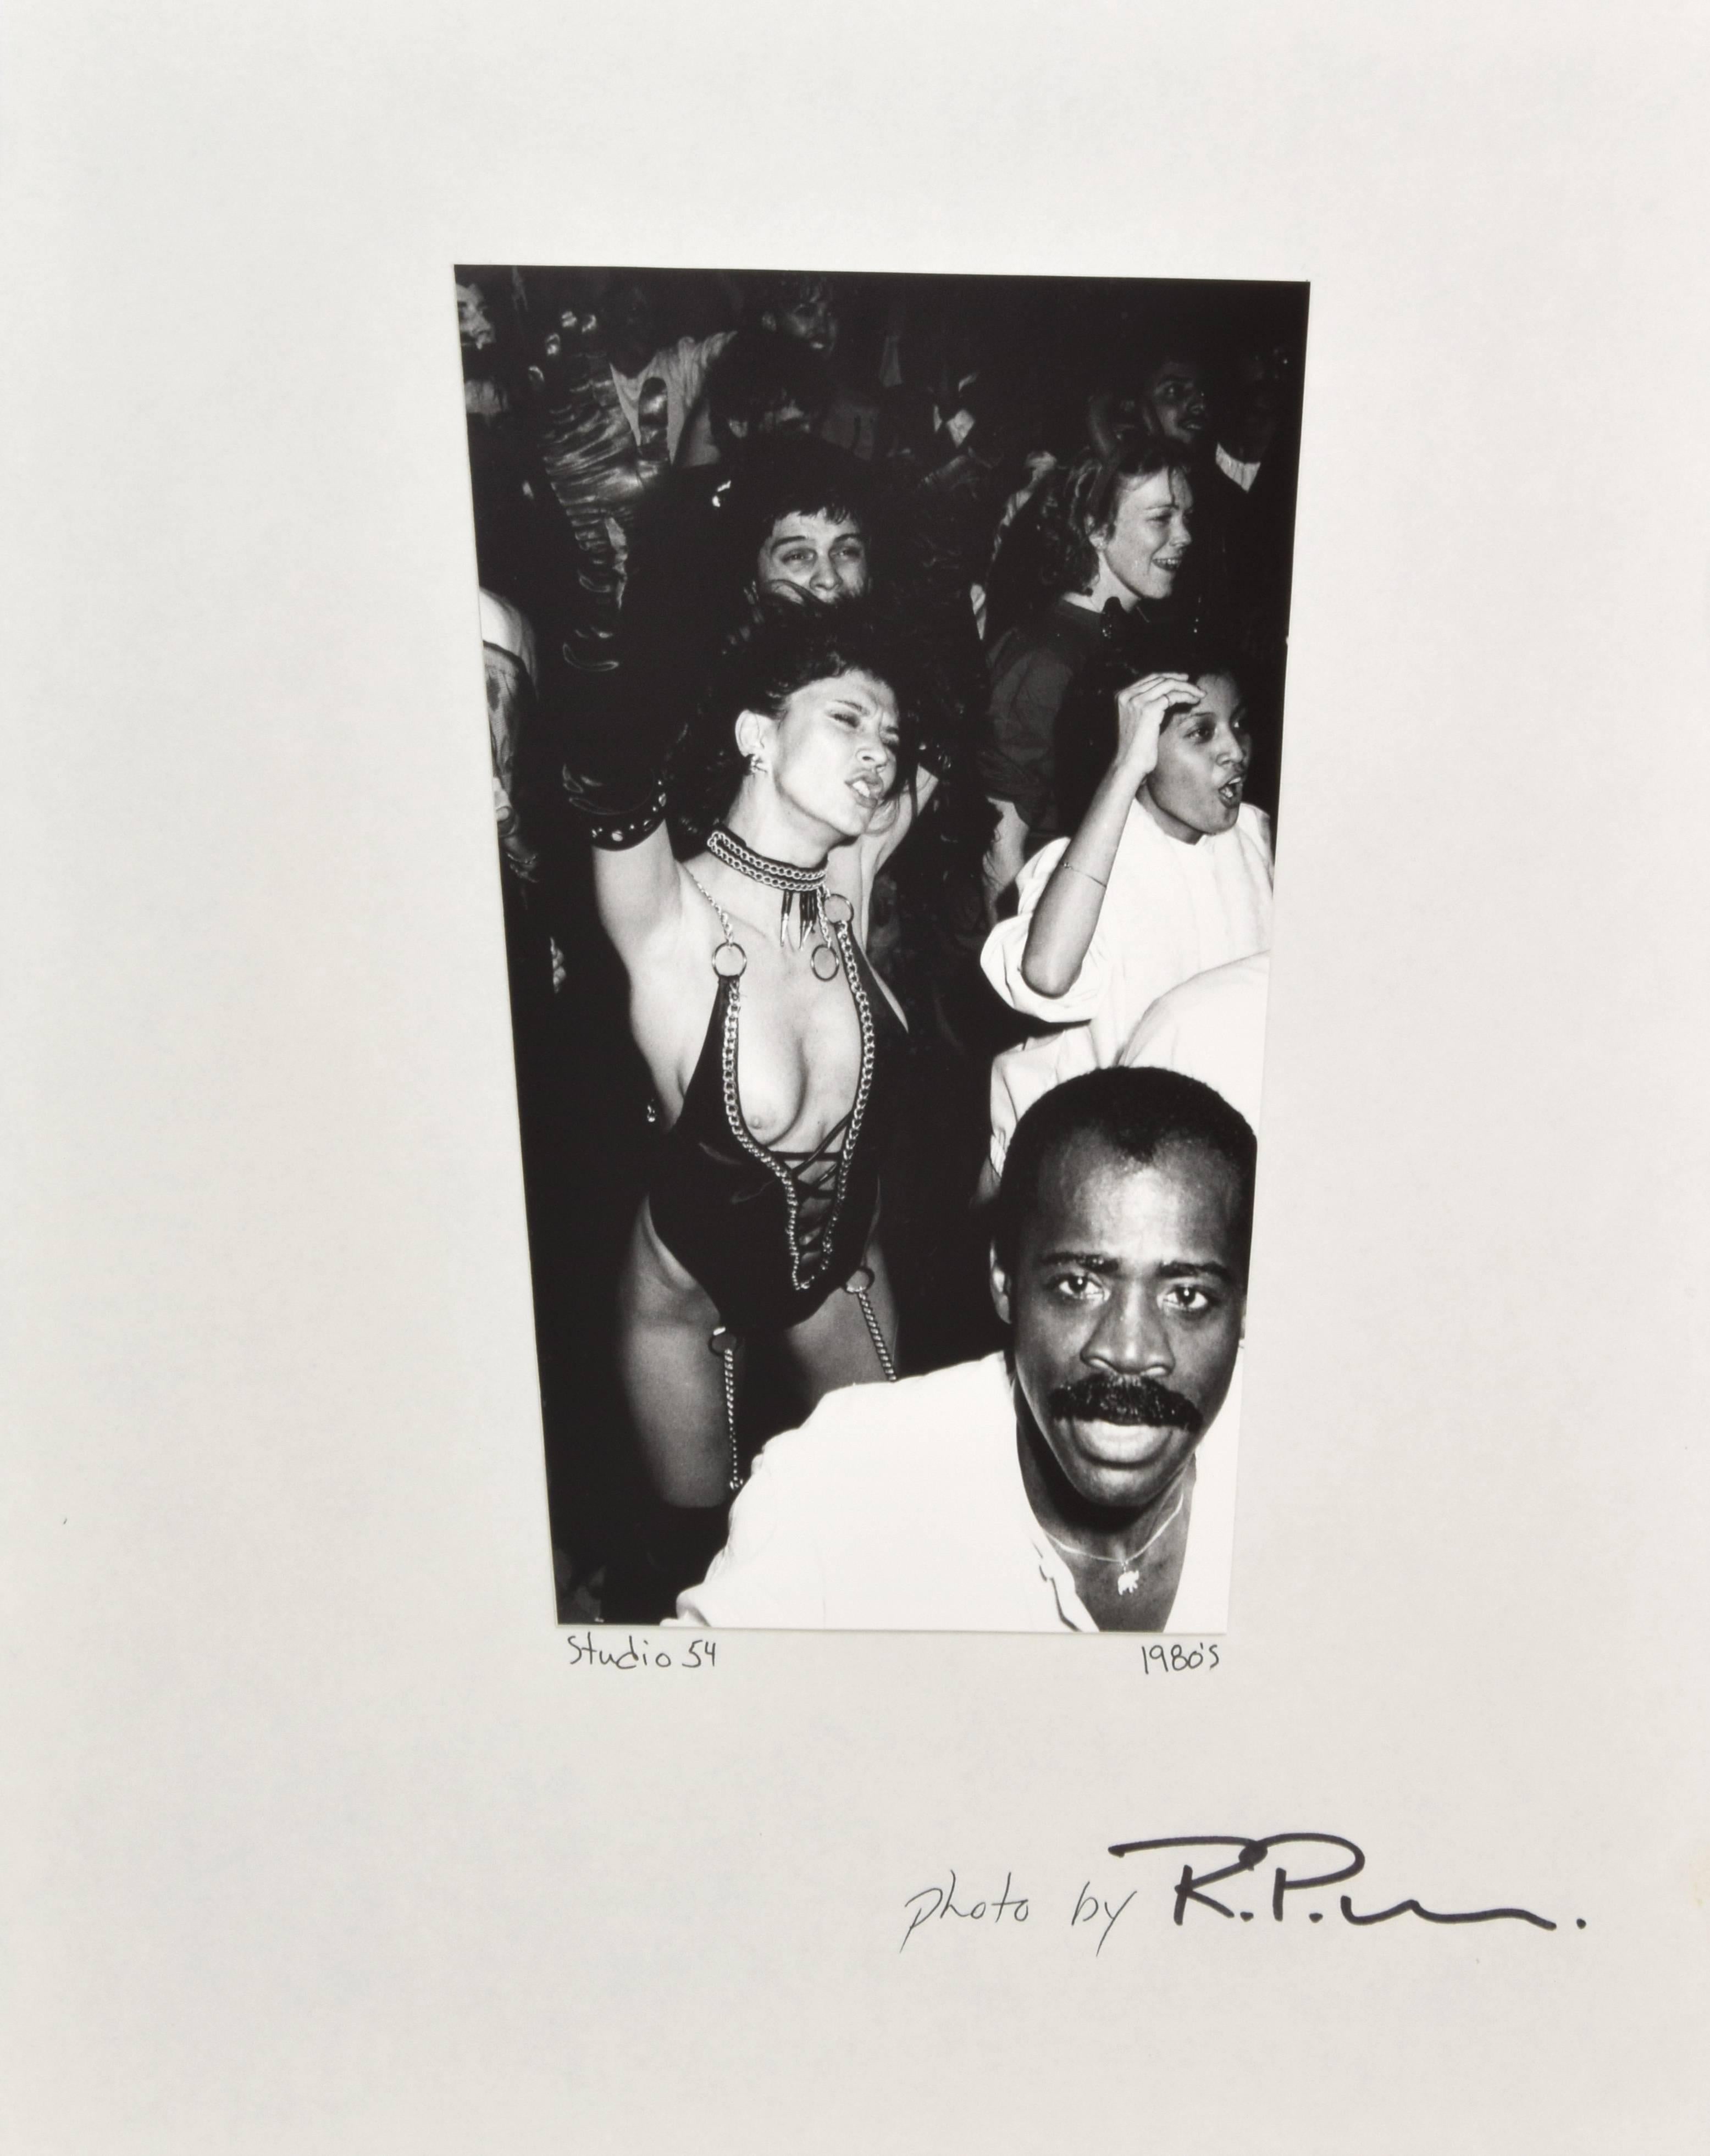 Two large-scale photographs, priced each, of guests at Studio 54 by Richard P. Manning aka RPM (American, 1941 -2013). Provenance: The Personal Collection of Bill & Carol Clements, Elizaville, New York. Manning and Clements were lifelong friends